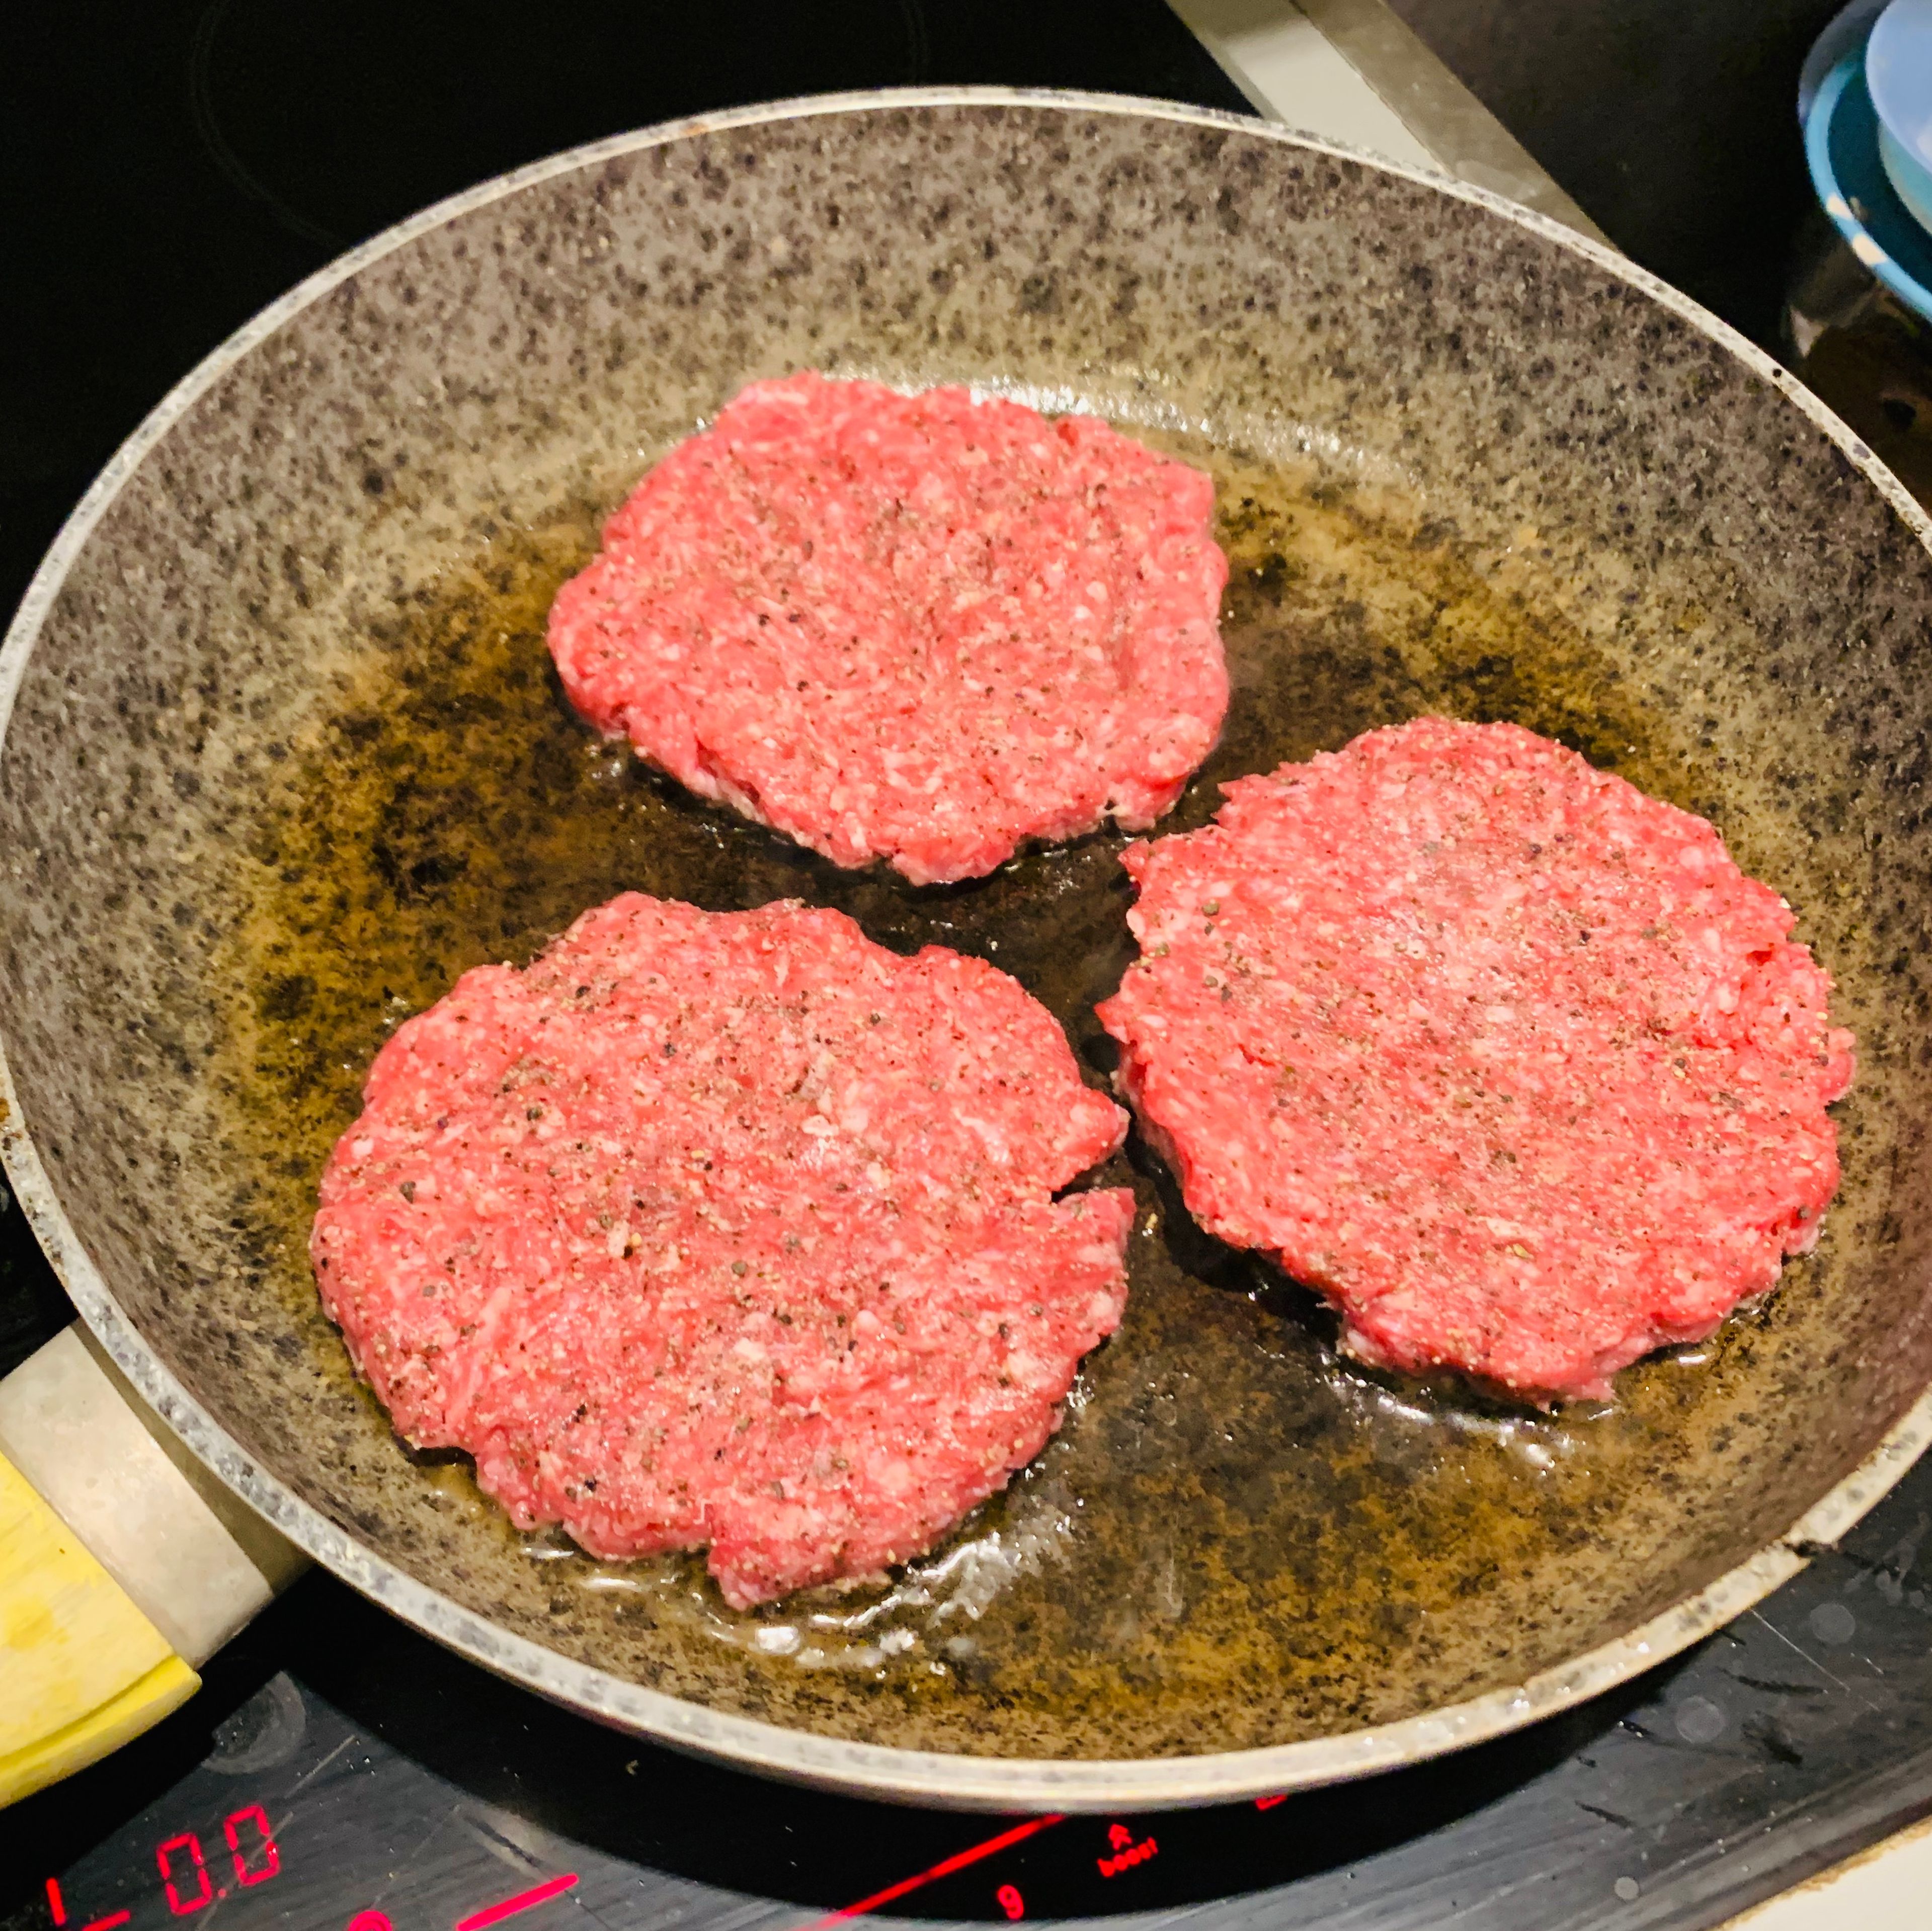 Now that everything else is ready, prepare your pan, some oil, medium high heat (6/10), cooking oil with some butter, get the burgers out of the fridge and very nicely drop them in the pan, pro tip, once they are hot, add some butter on top of each piece, and keep bringing up melted butter and oil on top while it’s cooking, make sure not to keep switching sides, flip only once